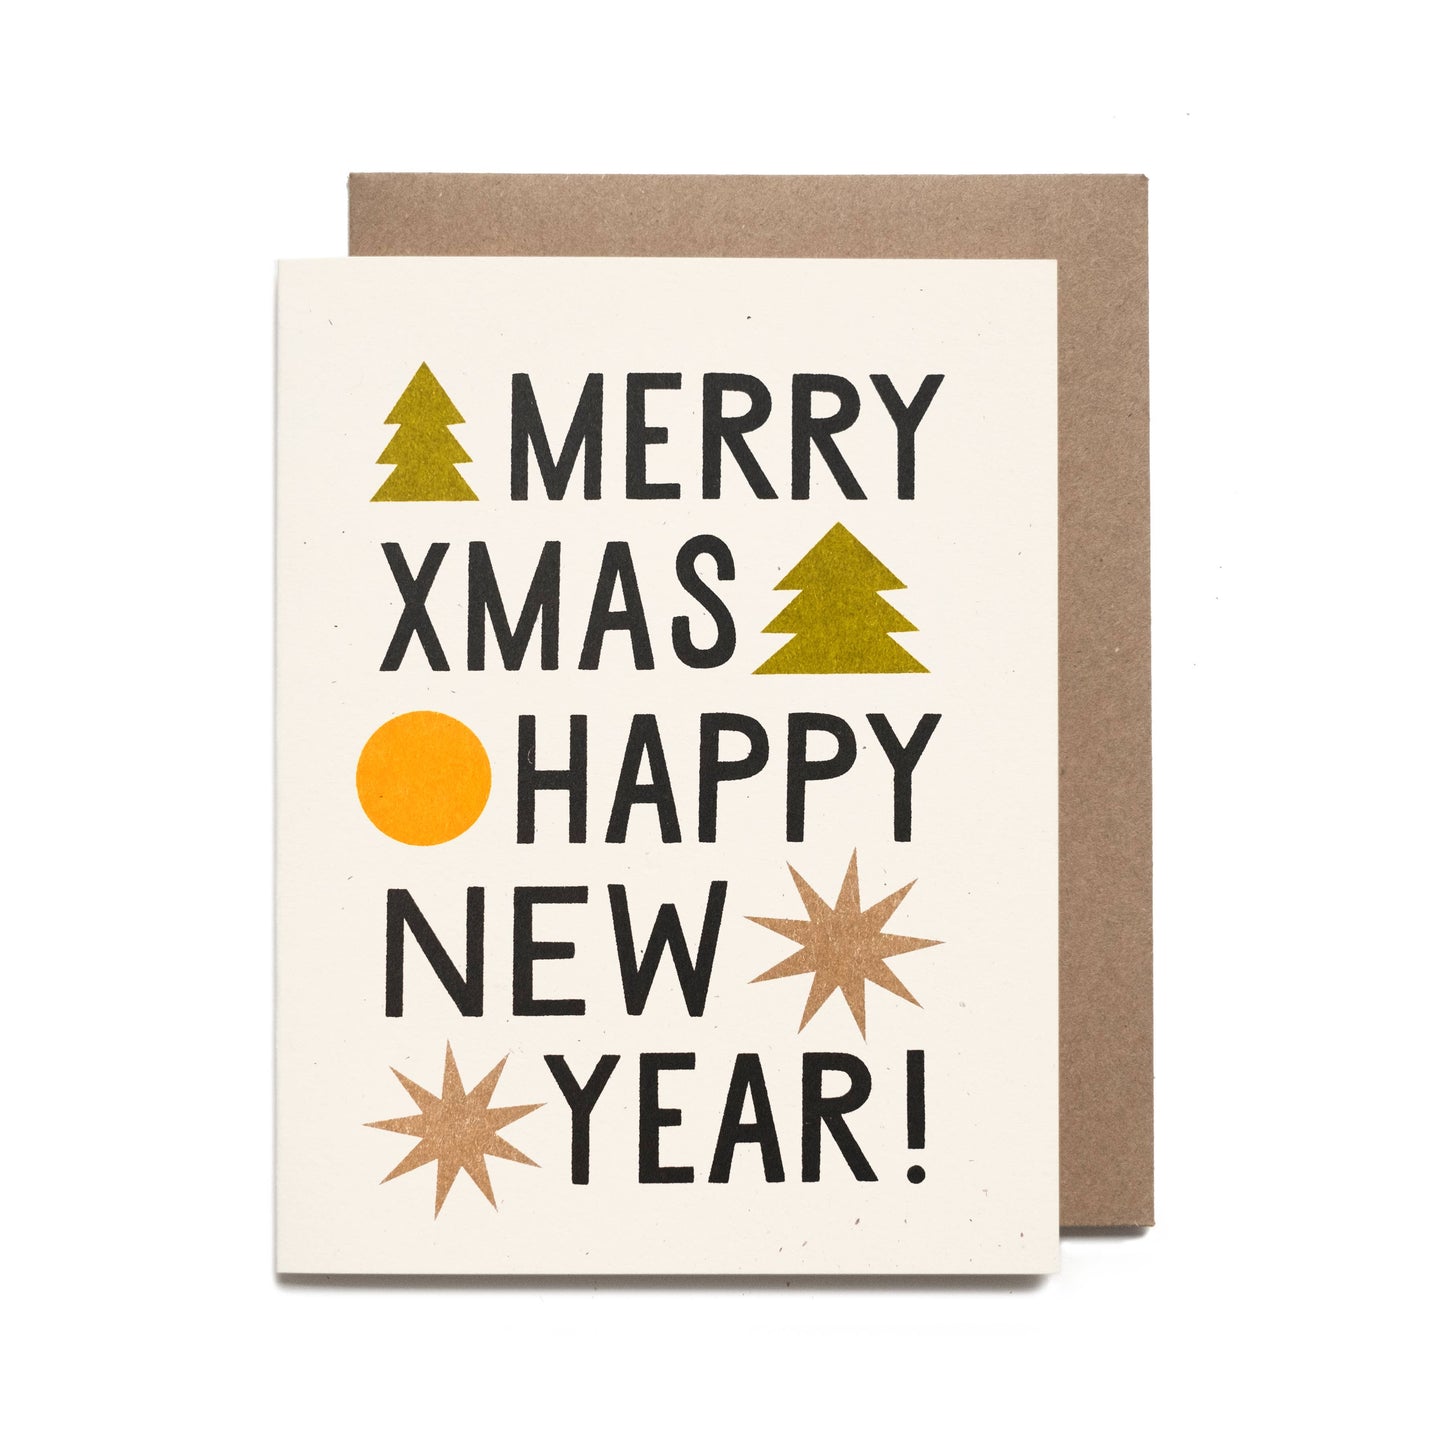 Merry Xmas, Happy New Year Card by Worthwhile Paper